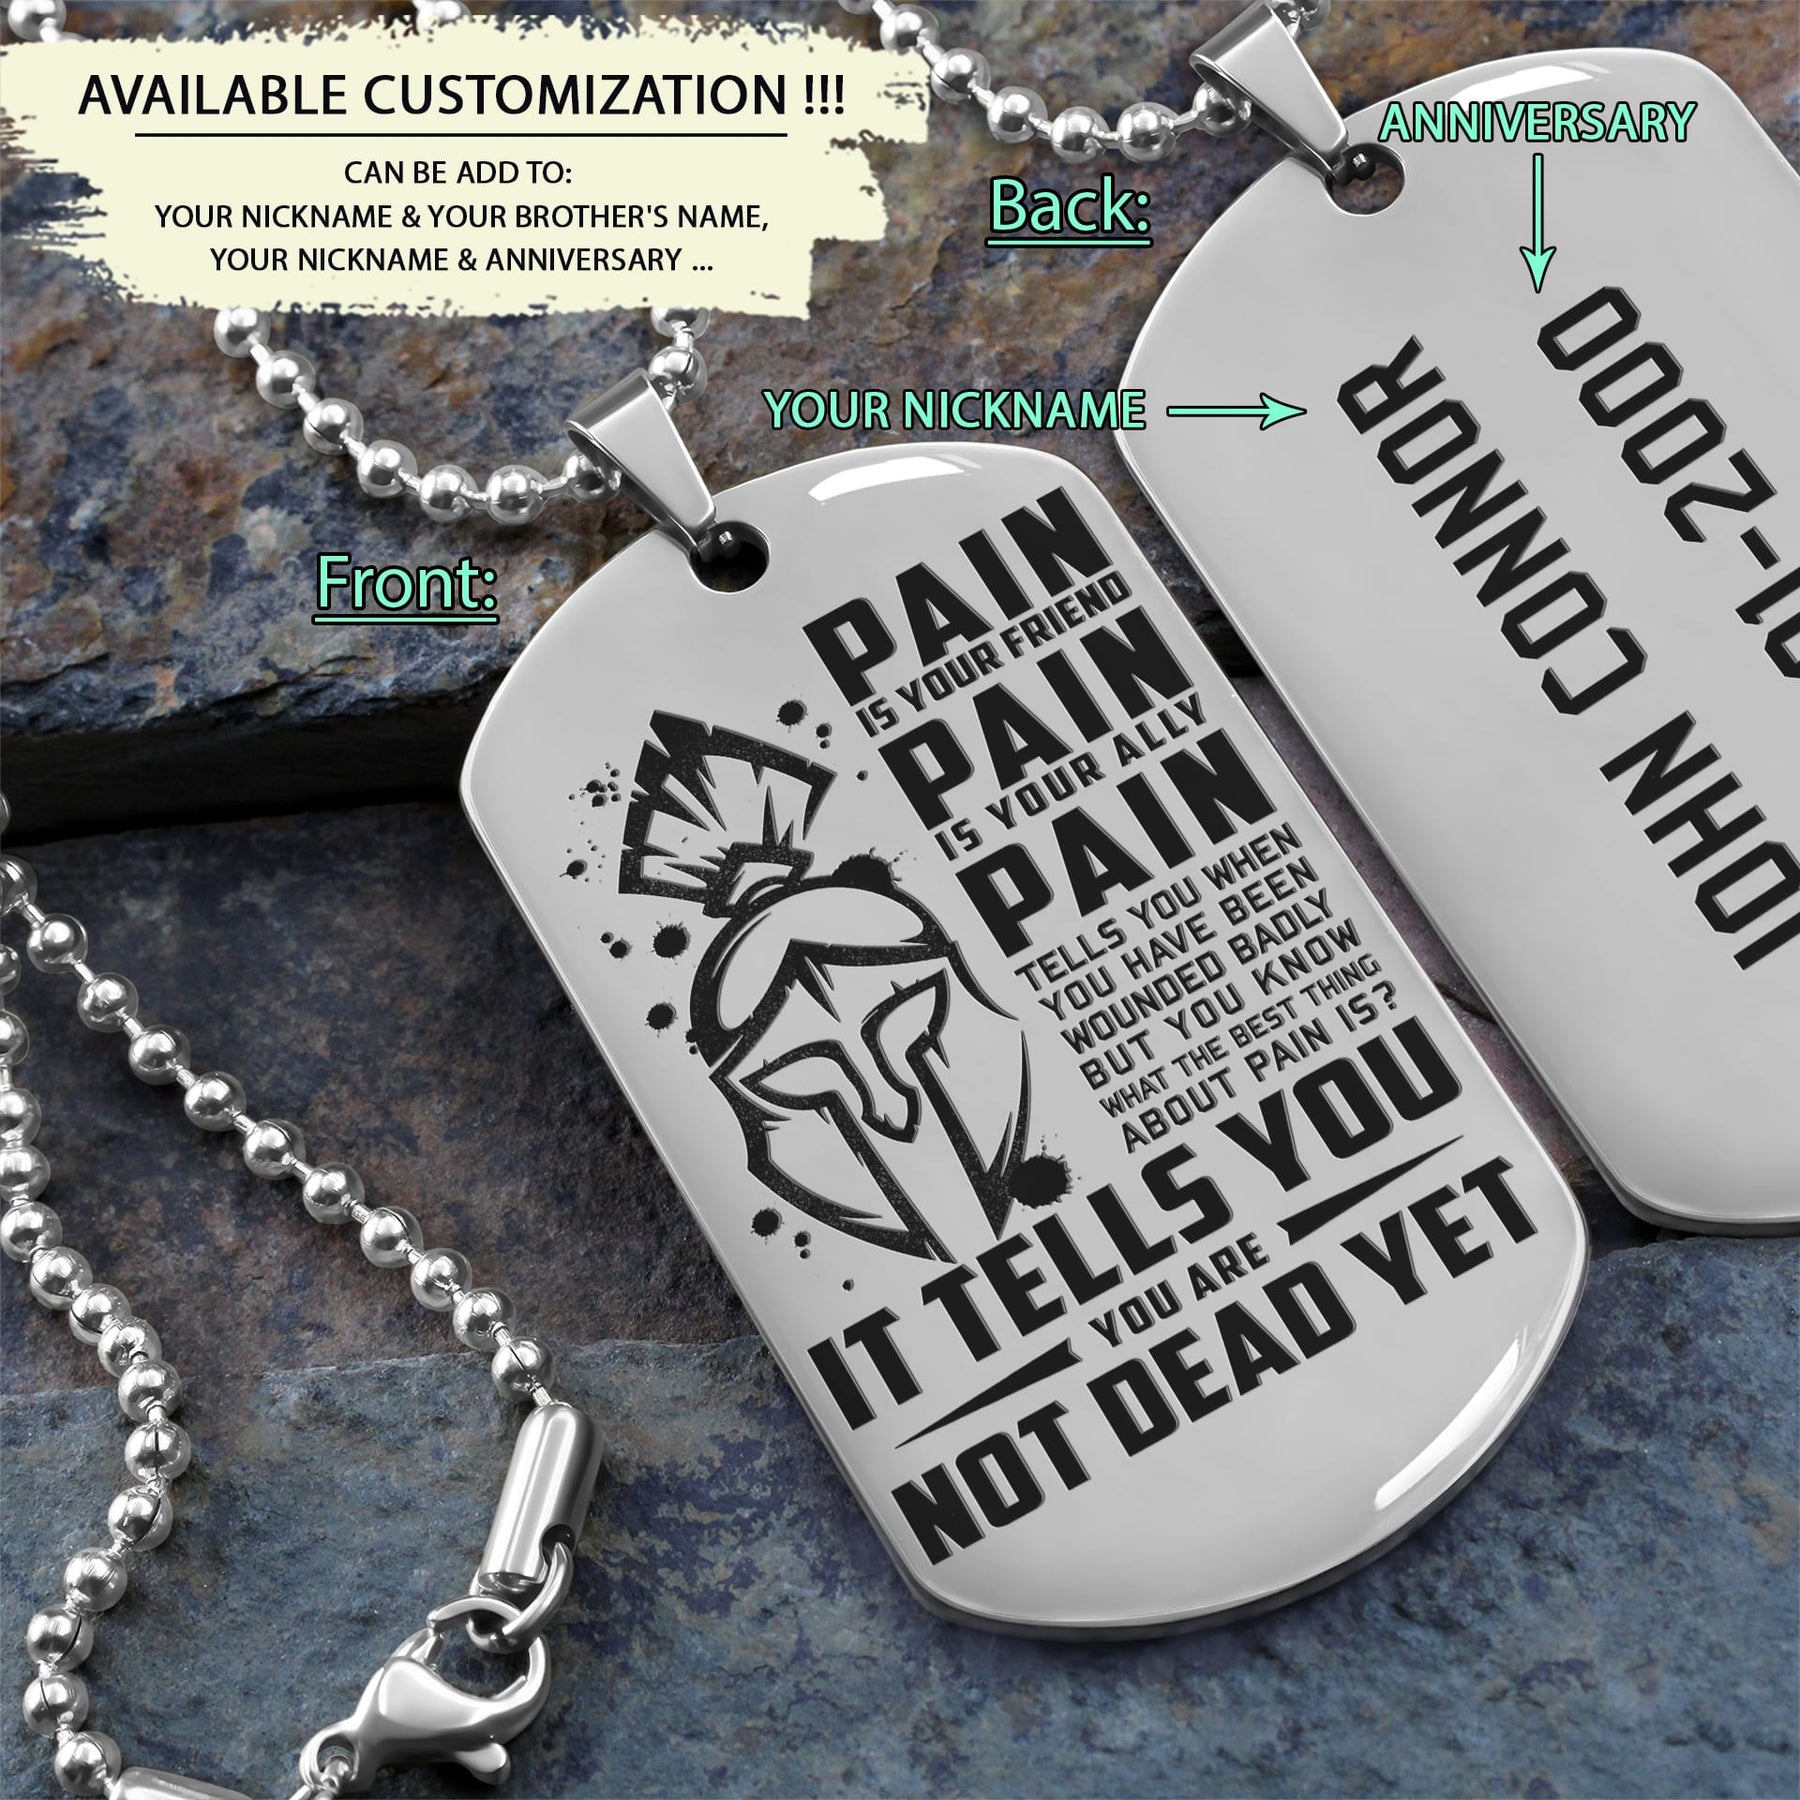 WAD016 - PAIN - You Are Not Dead Yet - Spartan - Warrior - Engrave Silver Dog Tag